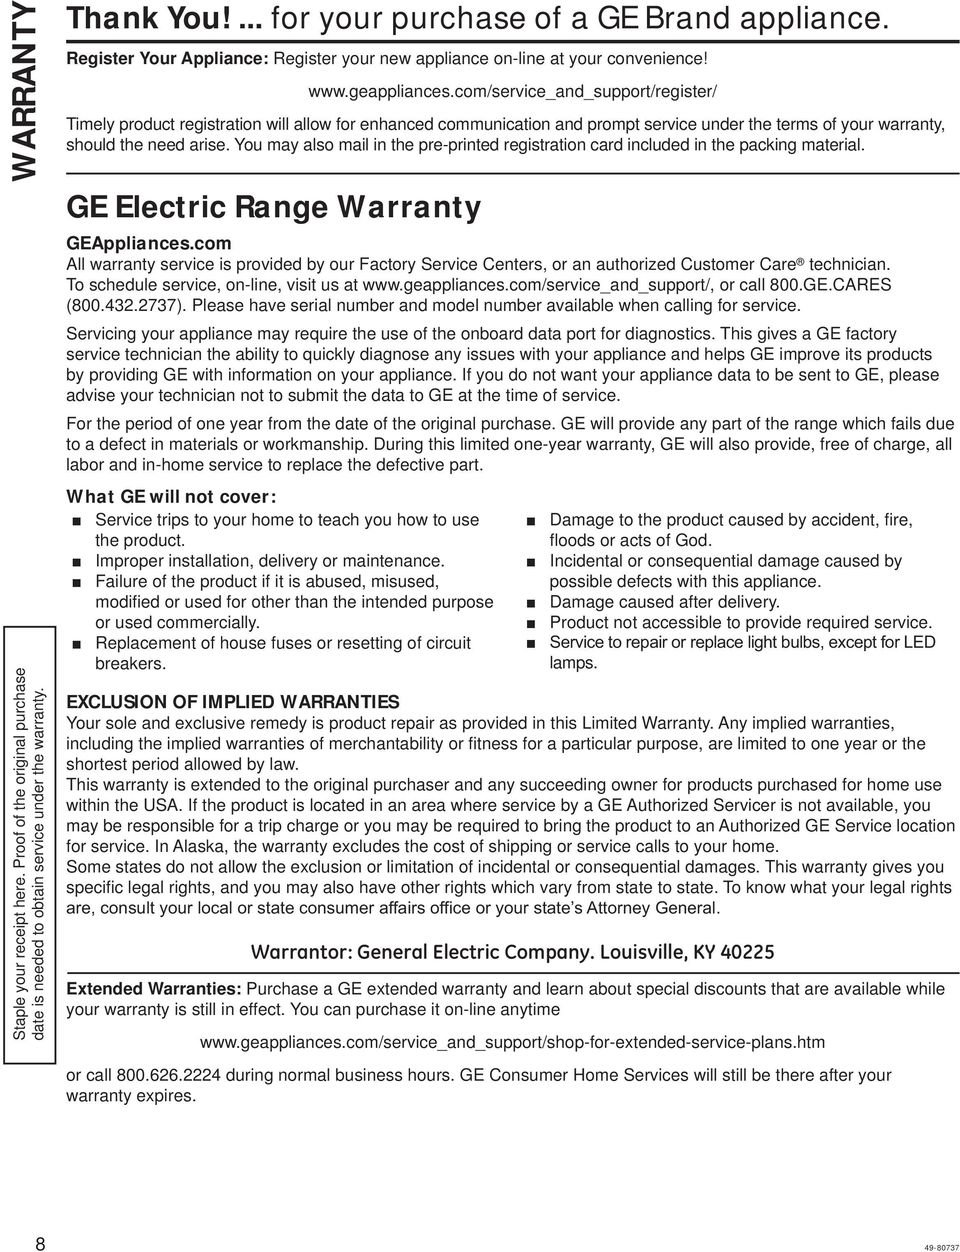 com All warranty service is provided by our Factory Service Centers, or an authorized Customer Care technician. To schedule service, on-line, visit us at www.geappliances.